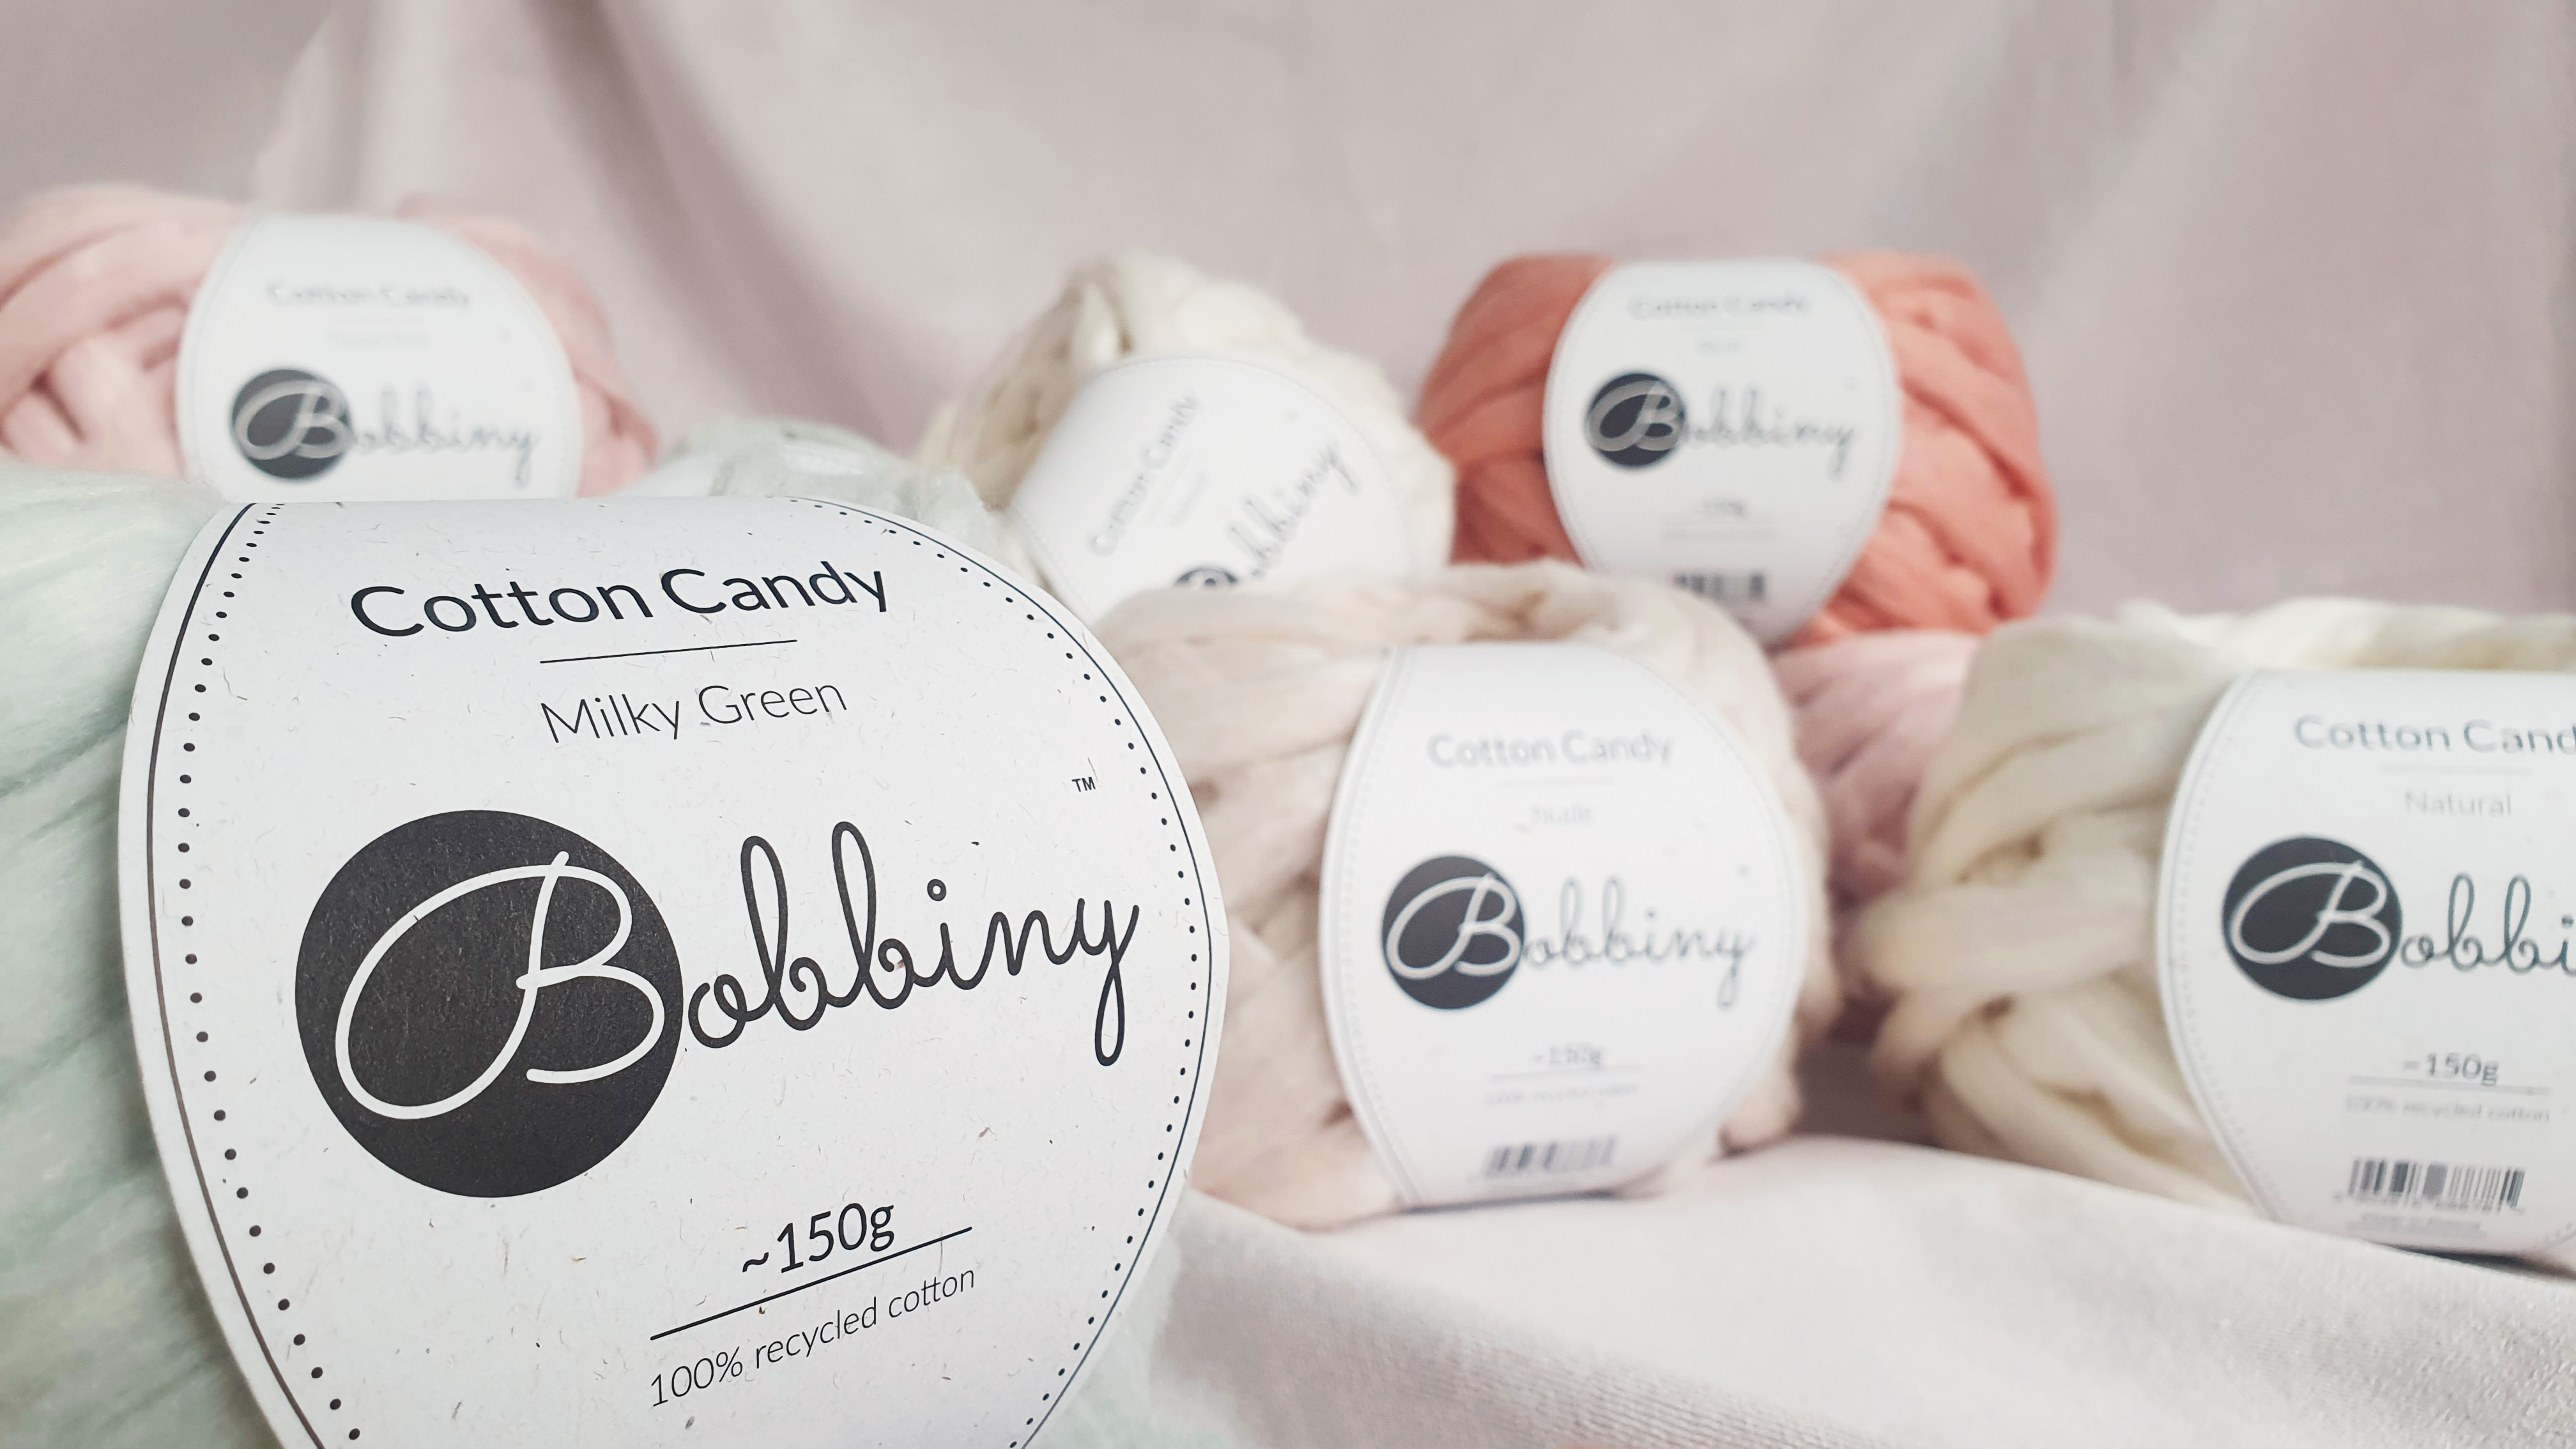 Cotton Candy - a new product in our offer!